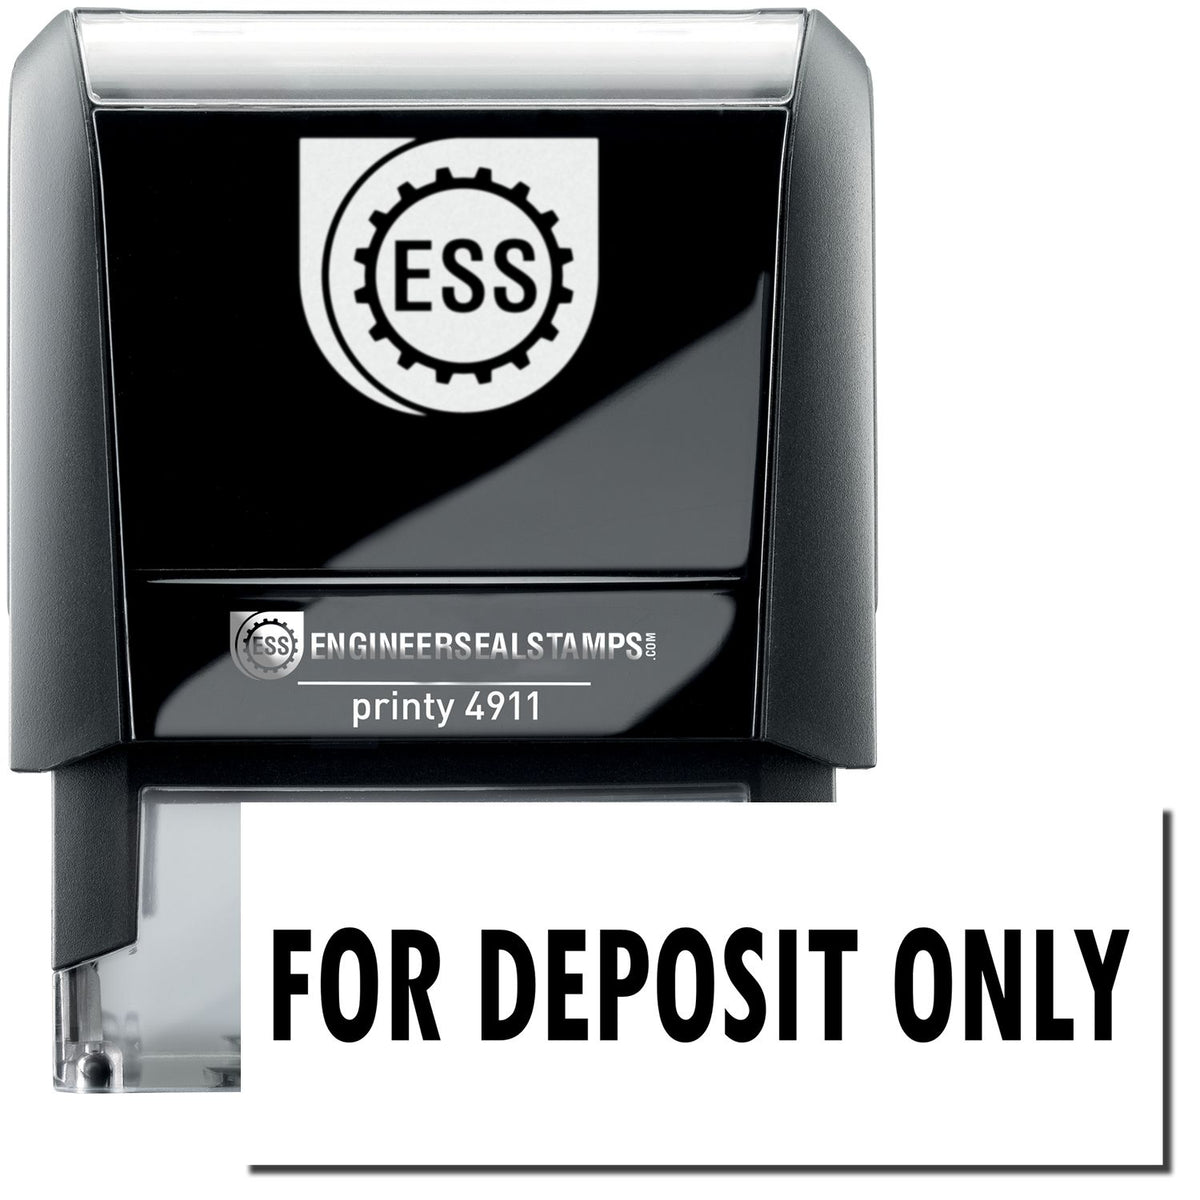 A self-inking stamp with a stamped image showing how the text &quot;FOR DEPOSIT ONLY&quot; is displayed after stamping.